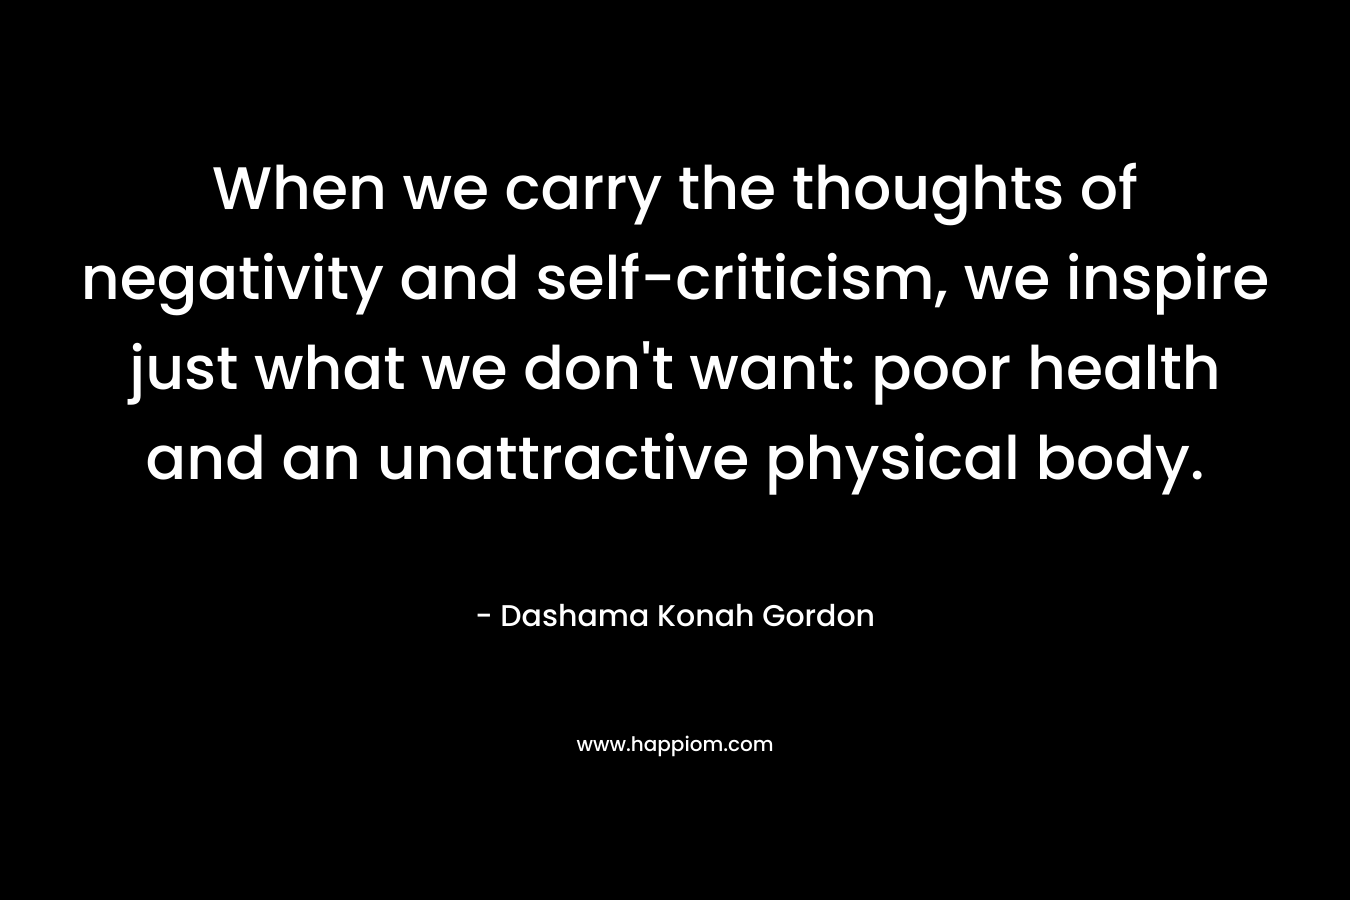 When we carry the thoughts of negativity and self-criticism, we inspire just what we don’t want: poor health and an unattractive physical body. – Dashama Konah Gordon